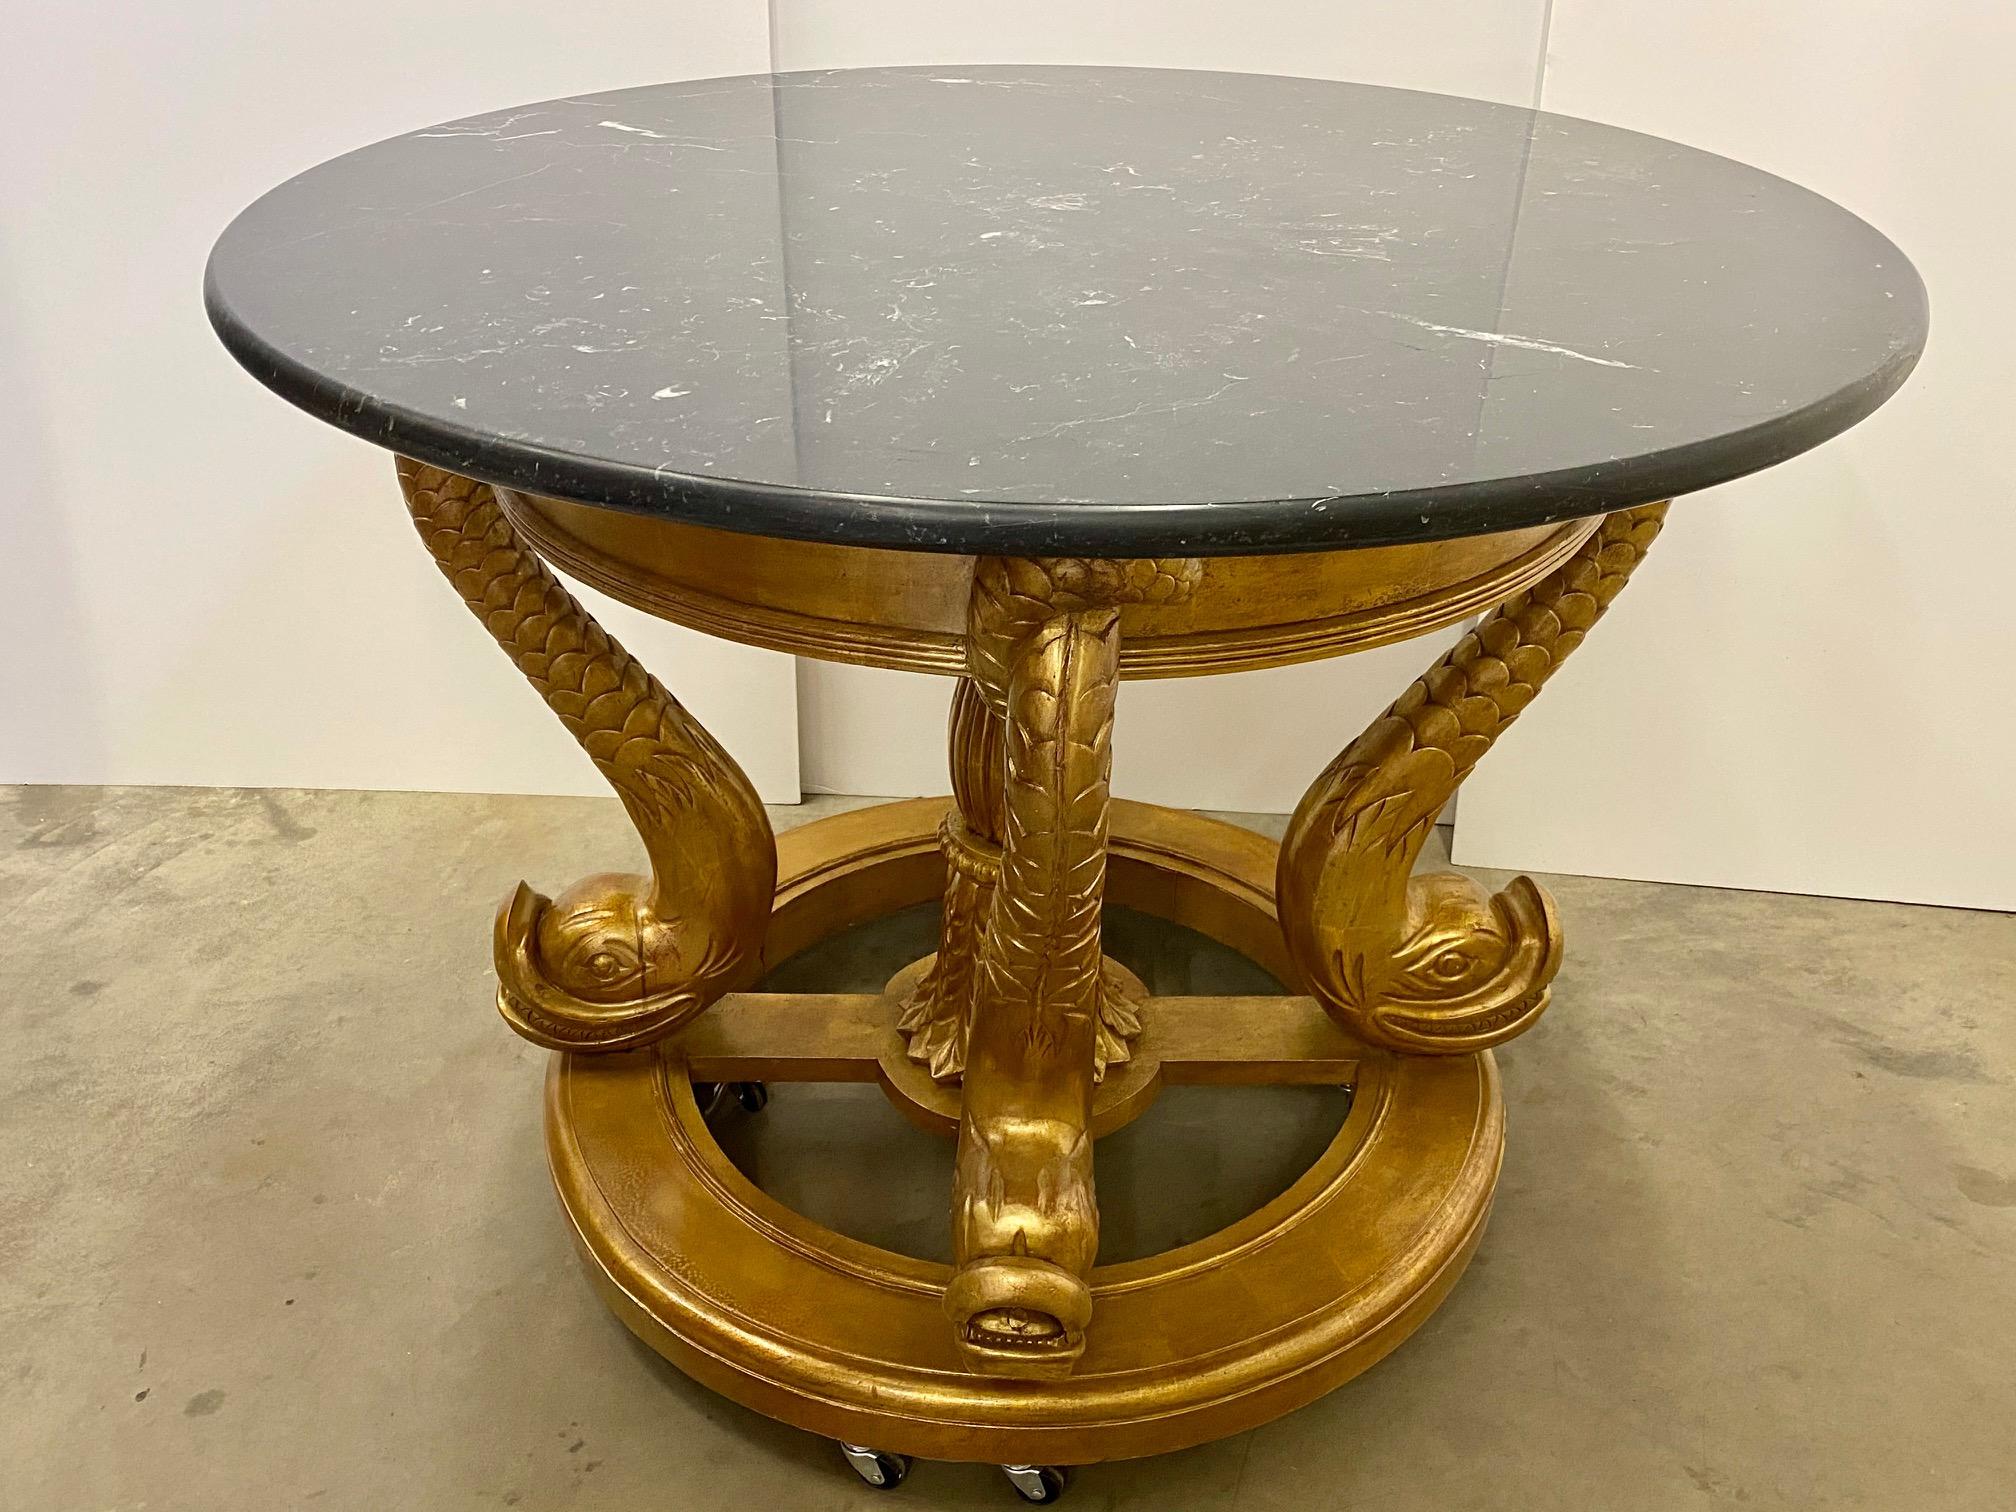 A large 47.5 gilt wood center table. The carved wood base with dolphins as legs with a black marble top with white veining... Spectacular showpiece.